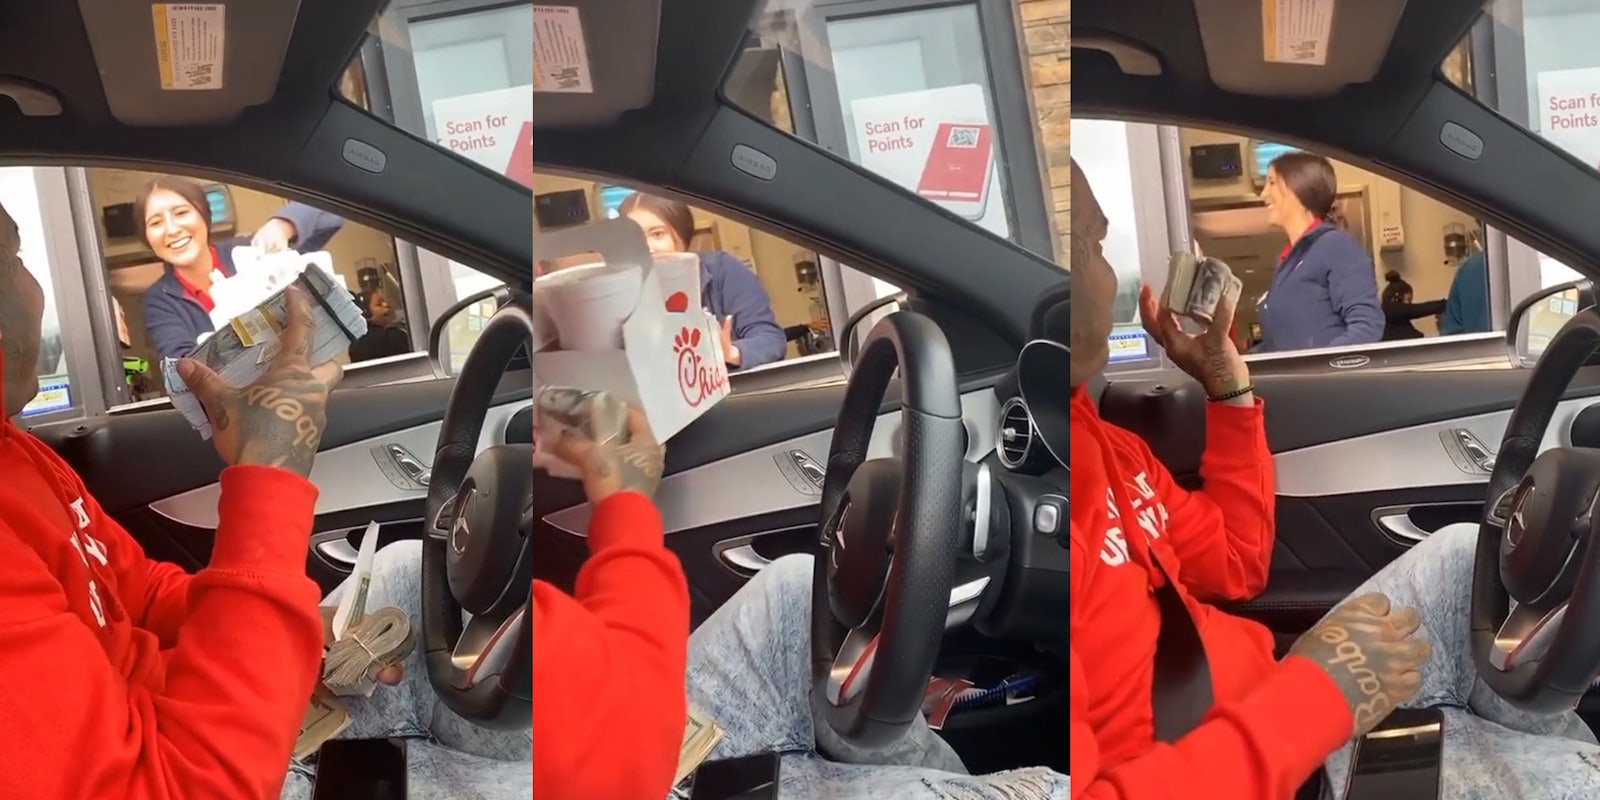 Chick-Fil-A employee speaking to customer with cash at drive thru (l) Chick-Fil-A employee speaking to customer with cash at drive thru (c) Chick-Fil-A employee speaking to customer with cash at drive thru (r)